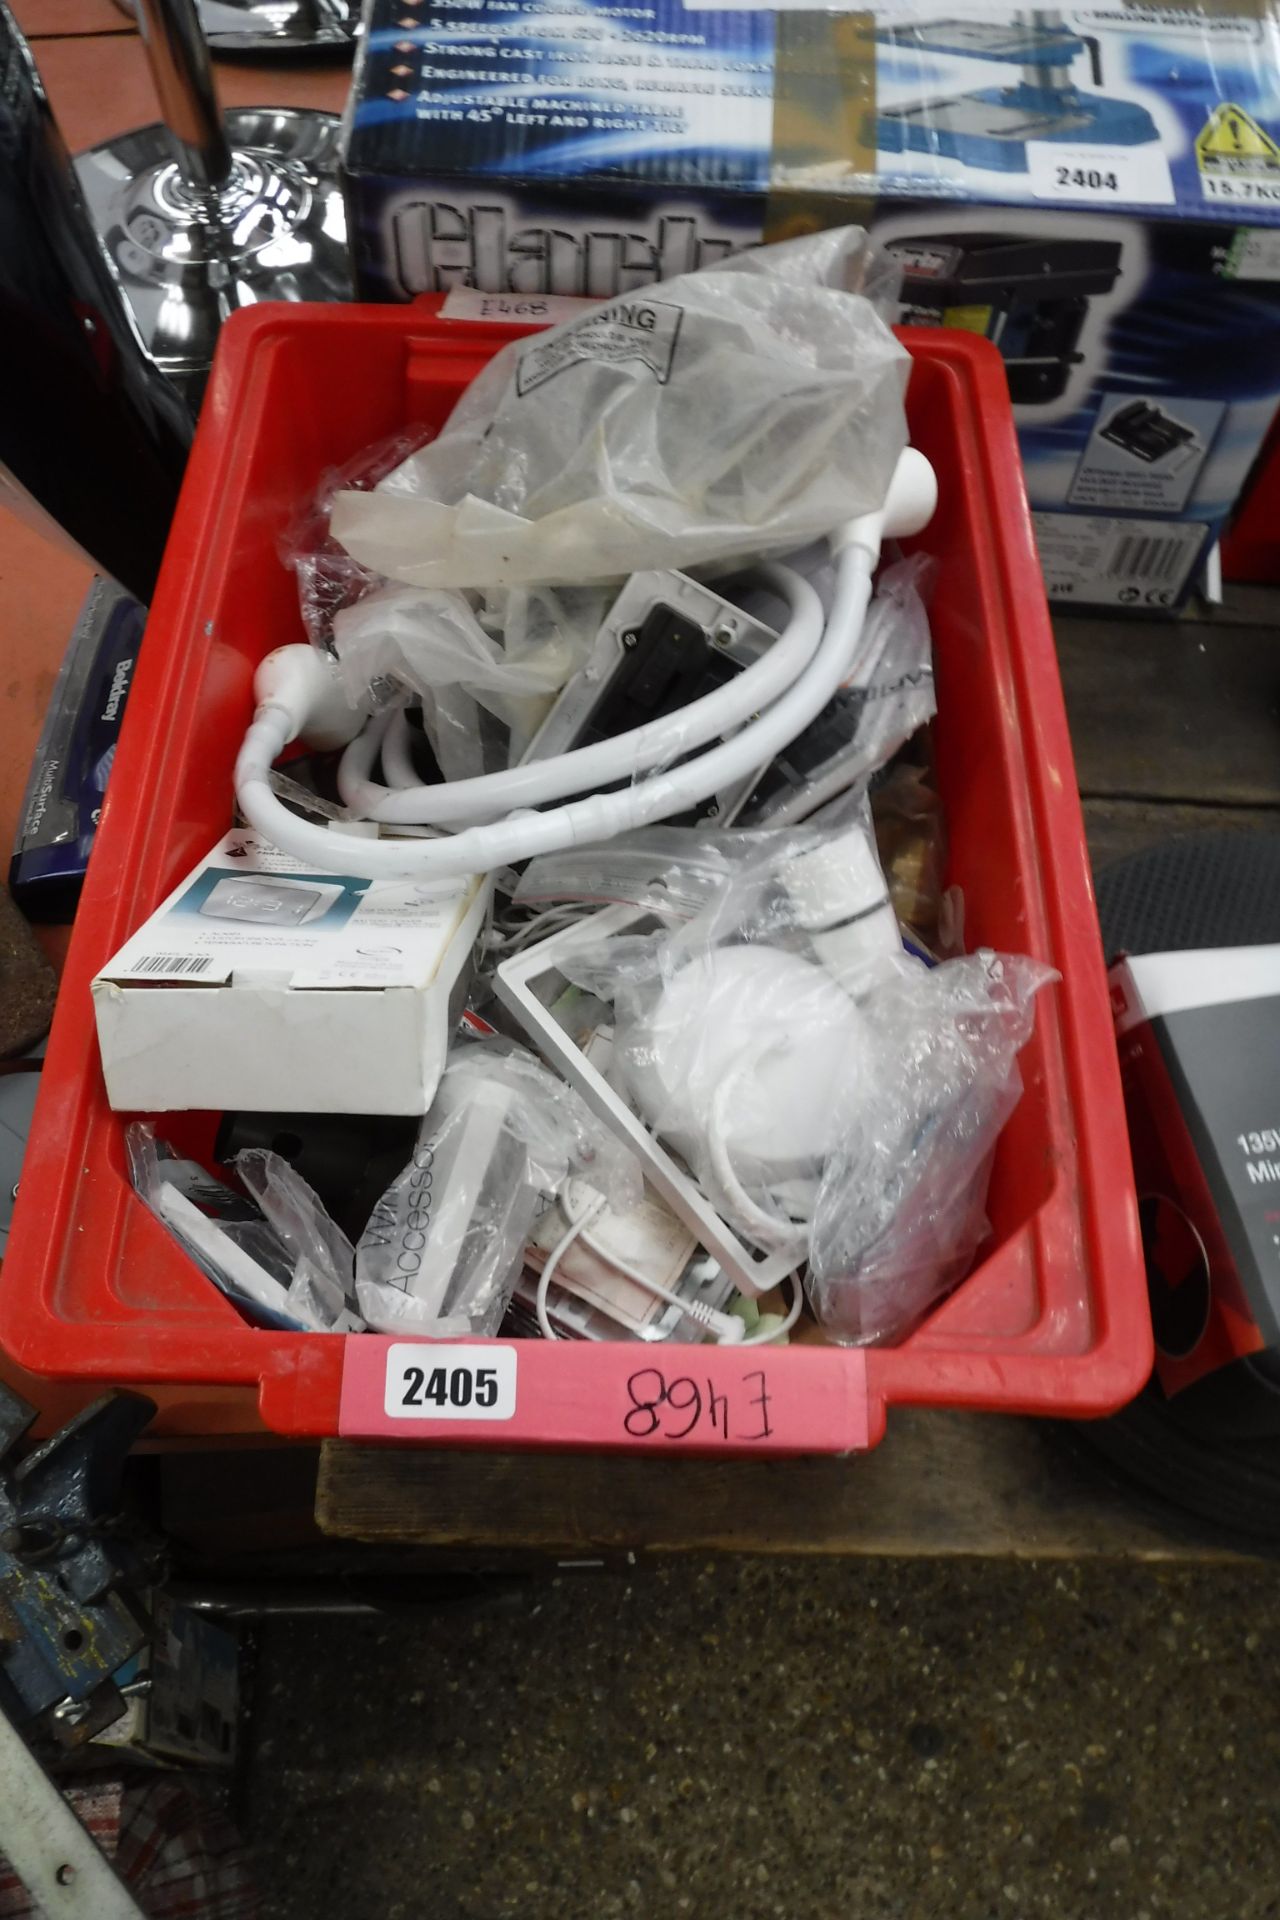 Box of various spares incl. switches, light fittings, shower hose etc.